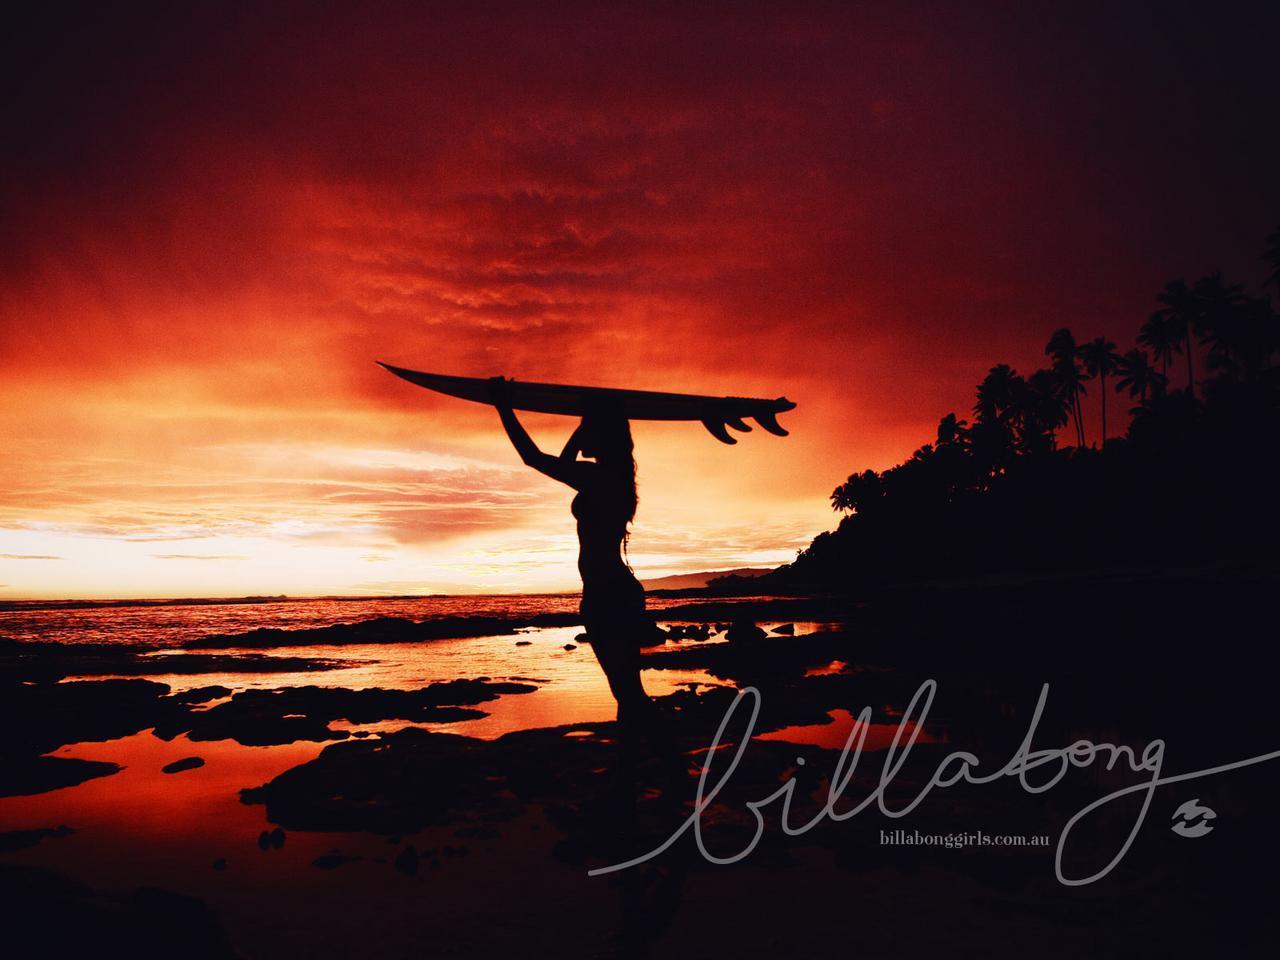 Picture Of Billabong